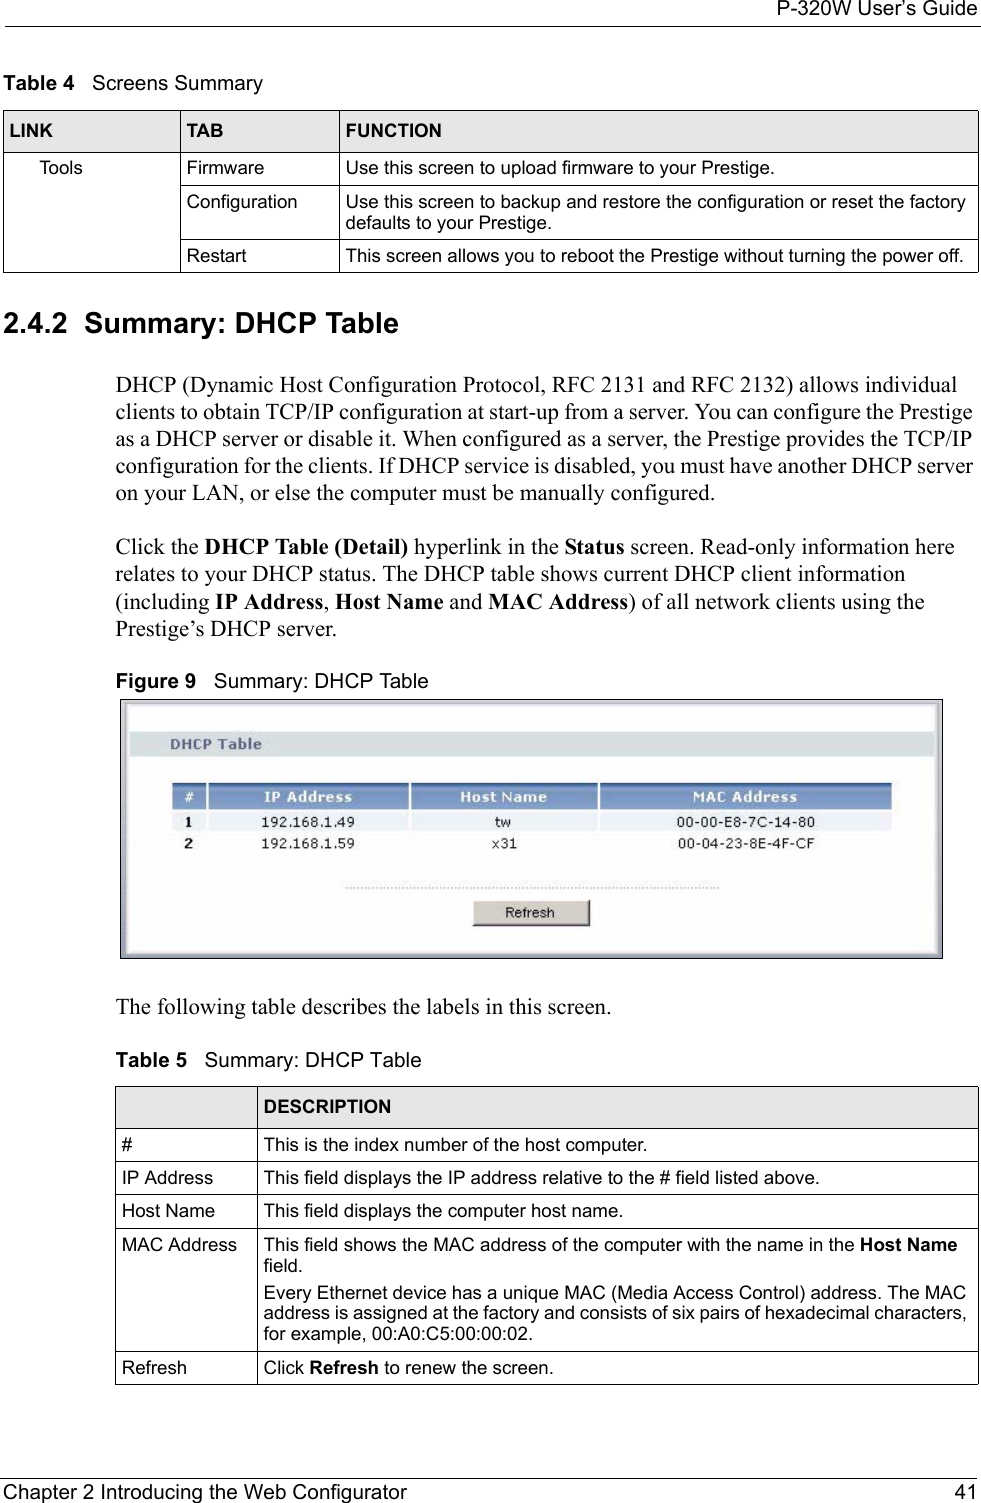 P-320W User’s GuideChapter 2 Introducing the Web Configurator 412.4.2  Summary: DHCP TableDHCP (Dynamic Host Configuration Protocol, RFC 2131 and RFC 2132) allows individual clients to obtain TCP/IP configuration at start-up from a server. You can configure the Prestige as a DHCP server or disable it. When configured as a server, the Prestige provides the TCP/IP configuration for the clients. If DHCP service is disabled, you must have another DHCP server on your LAN, or else the computer must be manually configured.Click the DHCP Table (Detail) hyperlink in the Status screen. Read-only information here relates to your DHCP status. The DHCP table shows current DHCP client information (including IP Address, Host Name and MAC Address) of all network clients using the Prestige’s DHCP server.Figure 9   Summary: DHCP TableThe following table describes the labels in this screen.Table 5   Summary: DHCP Table LABEL  DESCRIPTION#  This is the index number of the host computer. IP Address This field displays the IP address relative to the # field listed above.Host Name  This field displays the computer host name.MAC Address This field shows the MAC address of the computer with the name in the Host Name field. Every Ethernet device has a unique MAC (Media Access Control) address. The MAC address is assigned at the factory and consists of six pairs of hexadecimal characters, for example, 00:A0:C5:00:00:02.Refresh Click Refresh to renew the screen. Tools Firmware Use this screen to upload firmware to your Prestige.Configuration Use this screen to backup and restore the configuration or reset the factory defaults to your Prestige. Restart This screen allows you to reboot the Prestige without turning the power off.Table 4   Screens SummaryLINK TAB FUNCTION